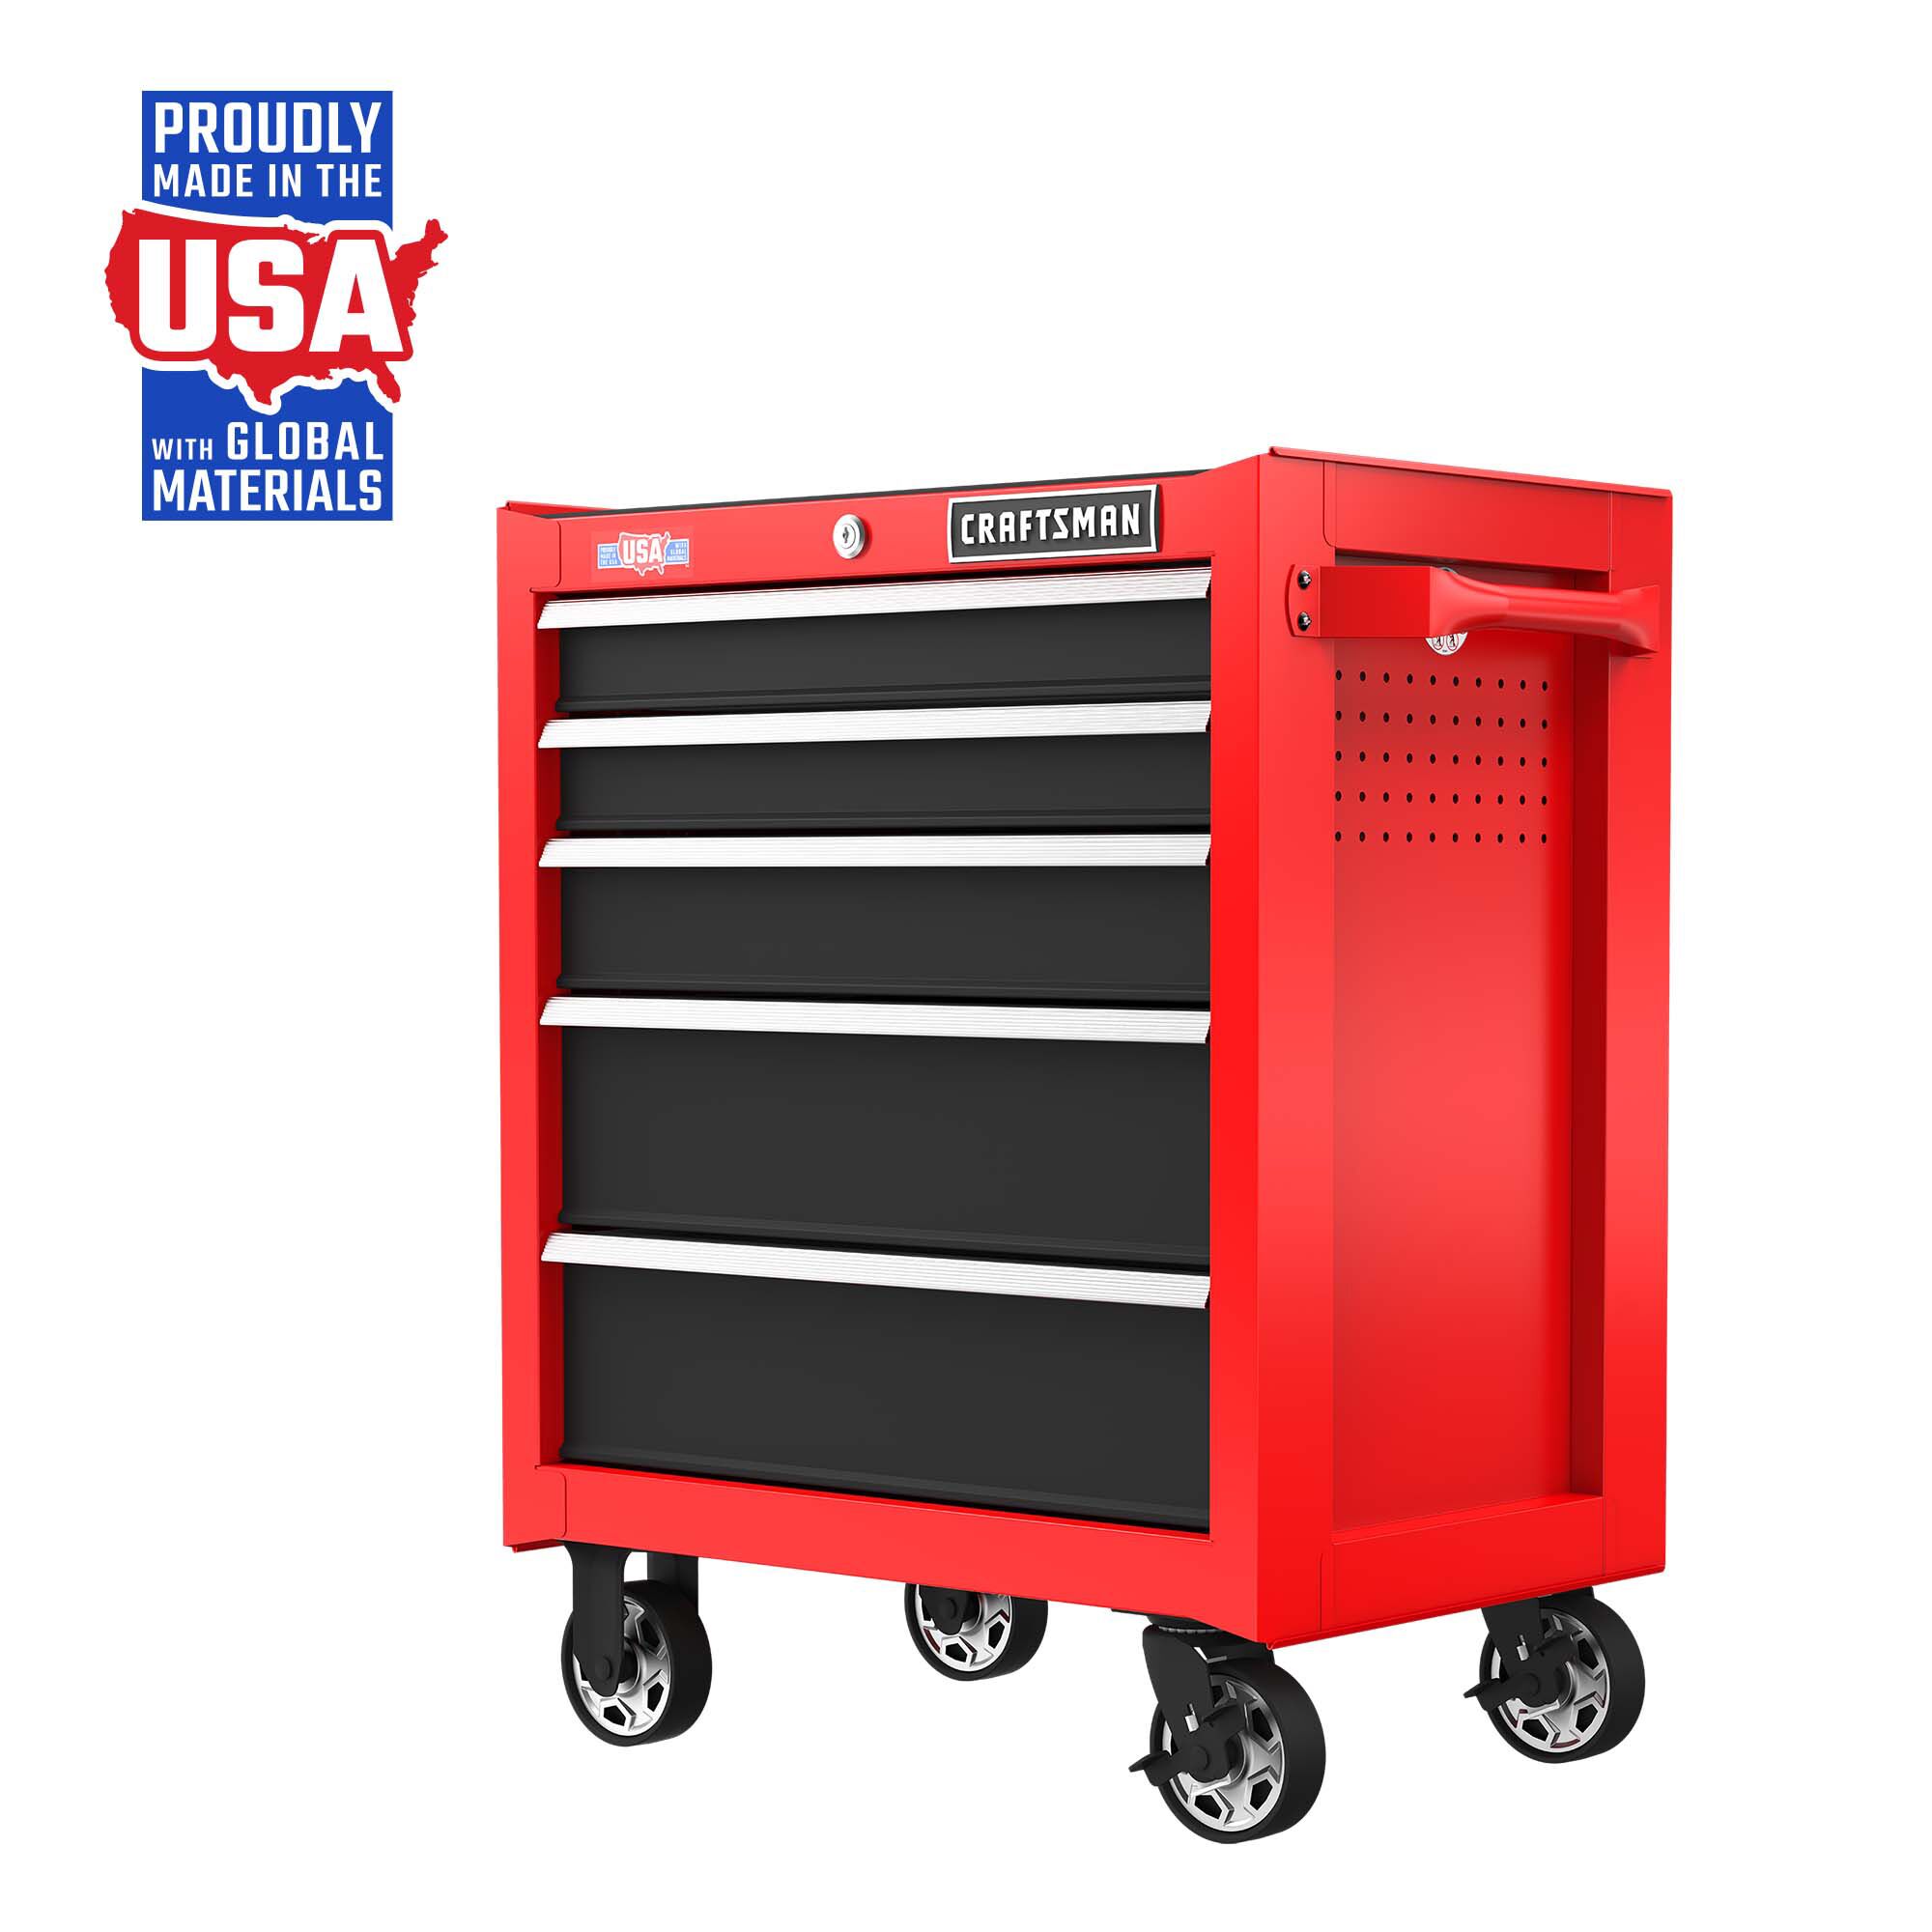 Big Red Tool Boxes/Chests